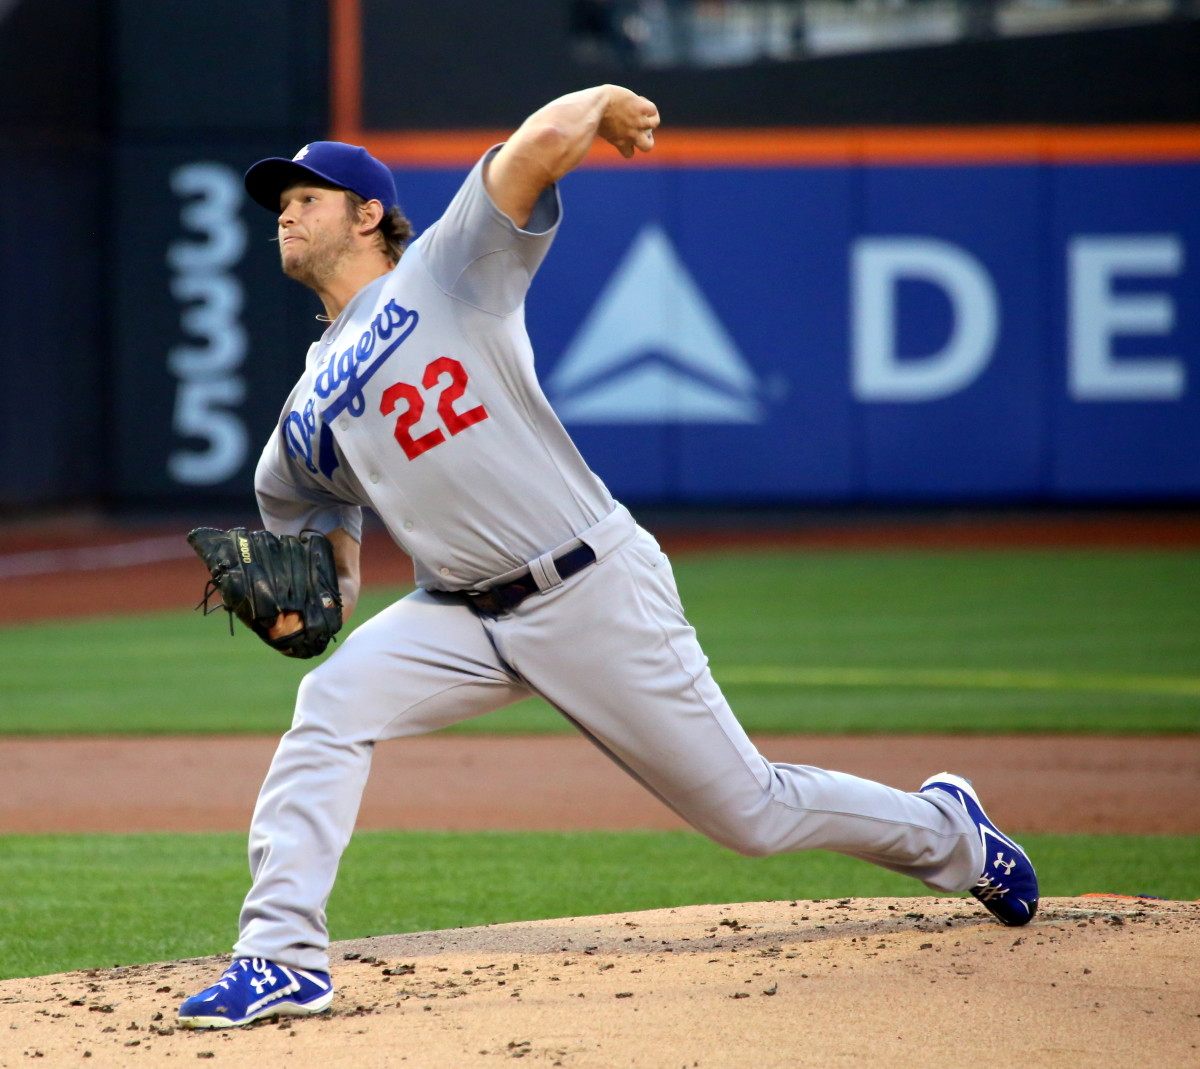 Dodgers pitcher Clayton Kershaw won the most recent National League Triple Crown in 2011.